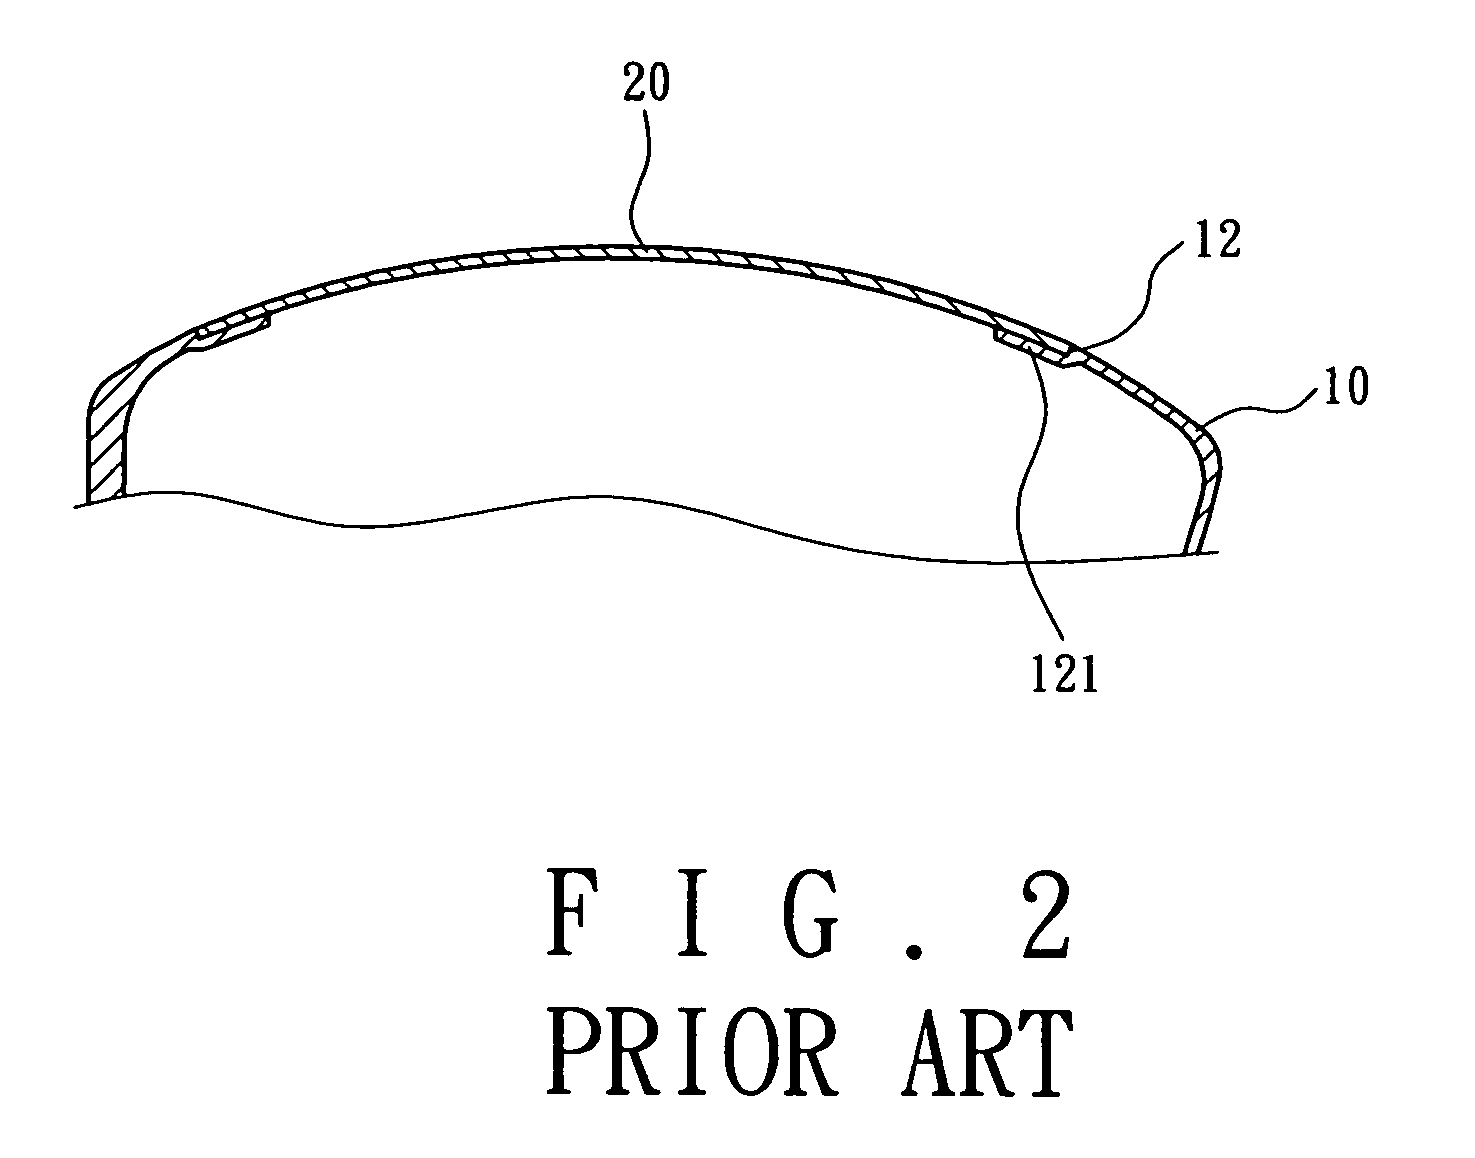 Golf club head and manufacturing method therefor